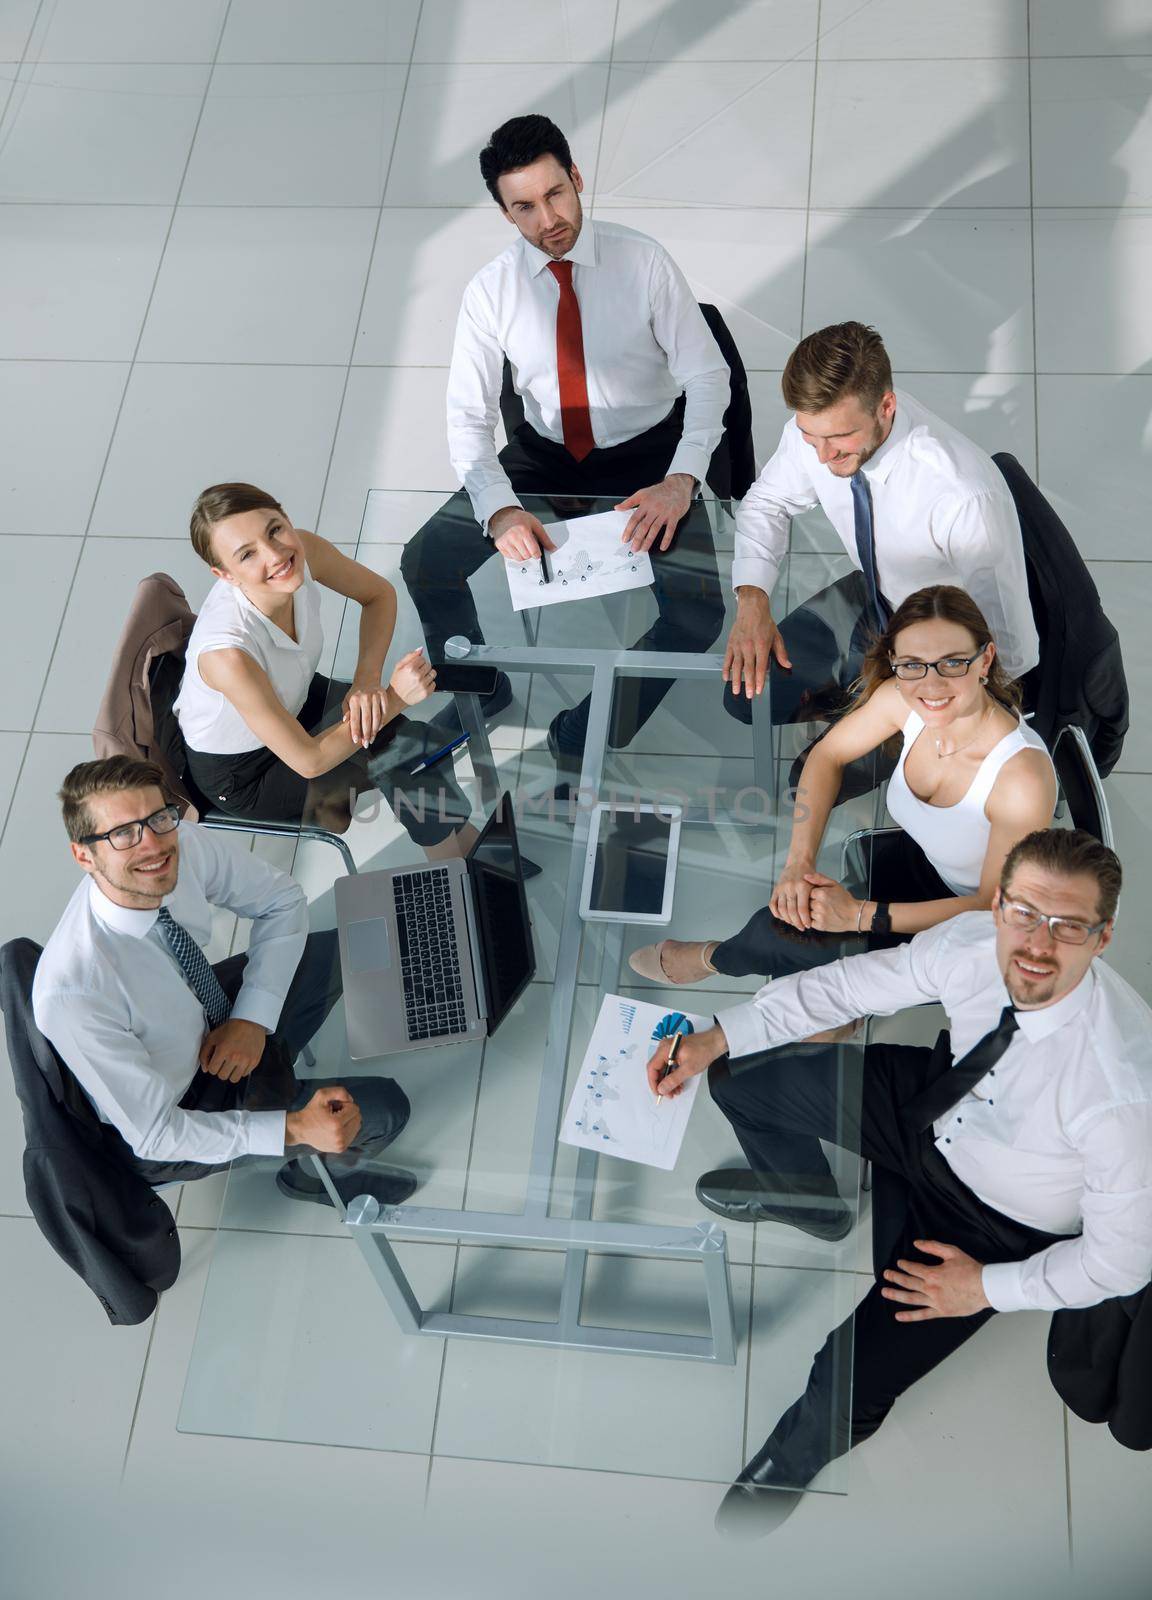 Business People Working Around a Conference Table by asdf